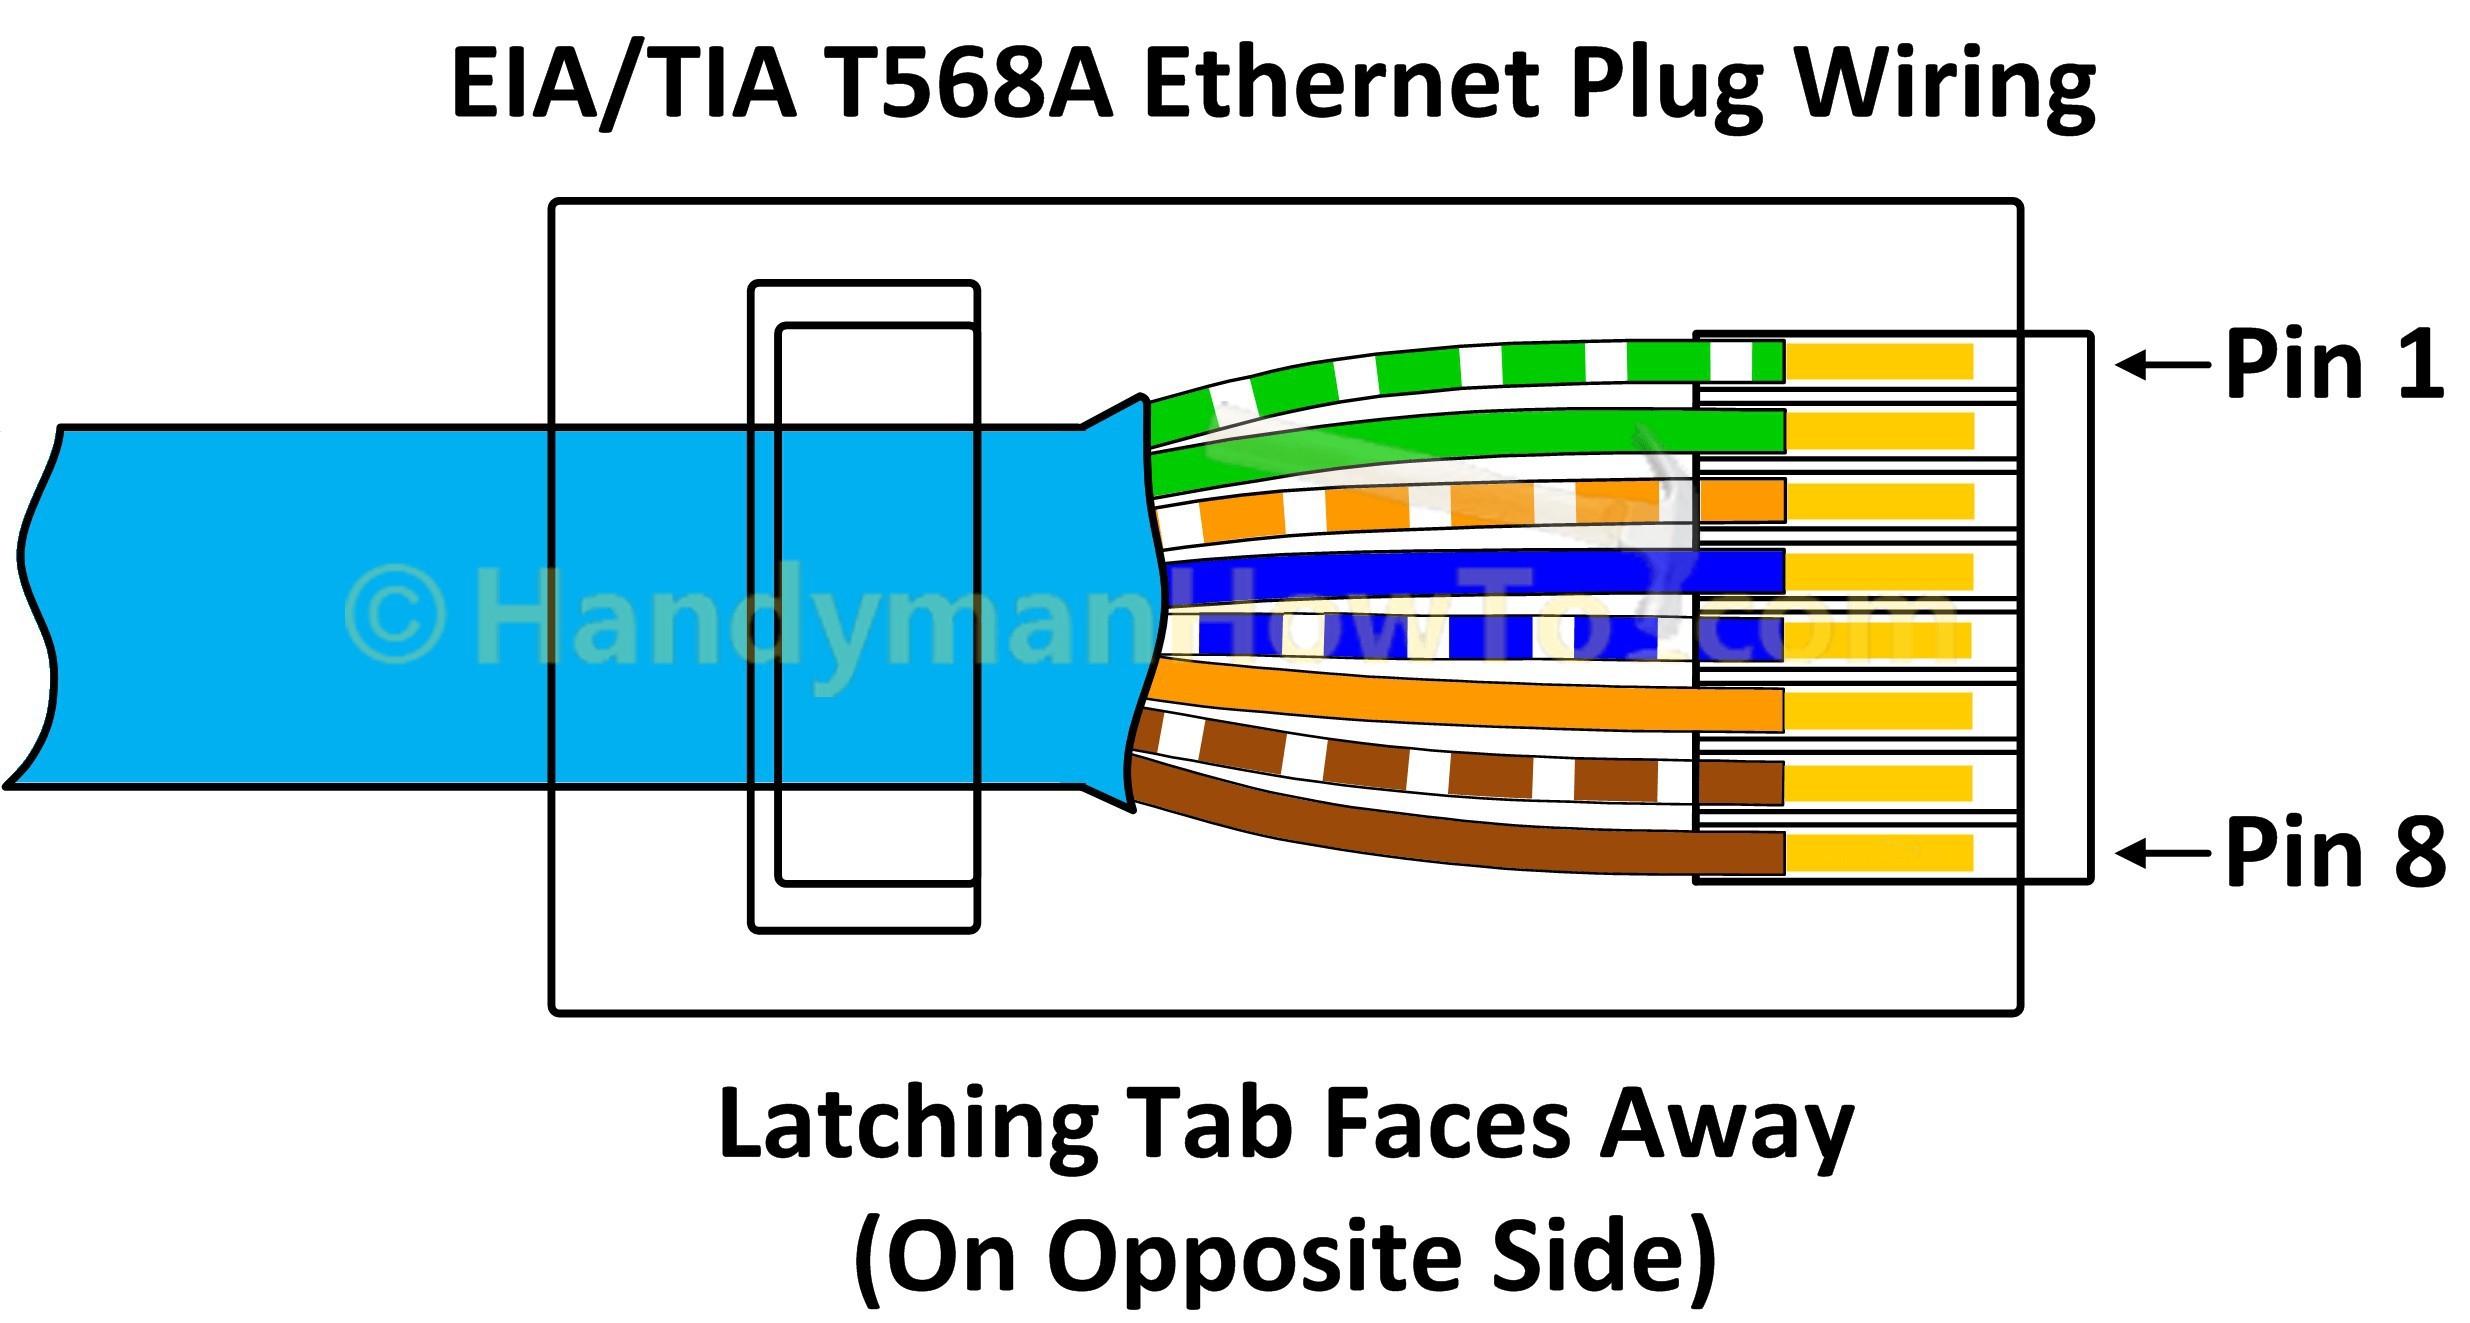 Rj45 Straight Wiring Diagram Best How To Make An Ethernet